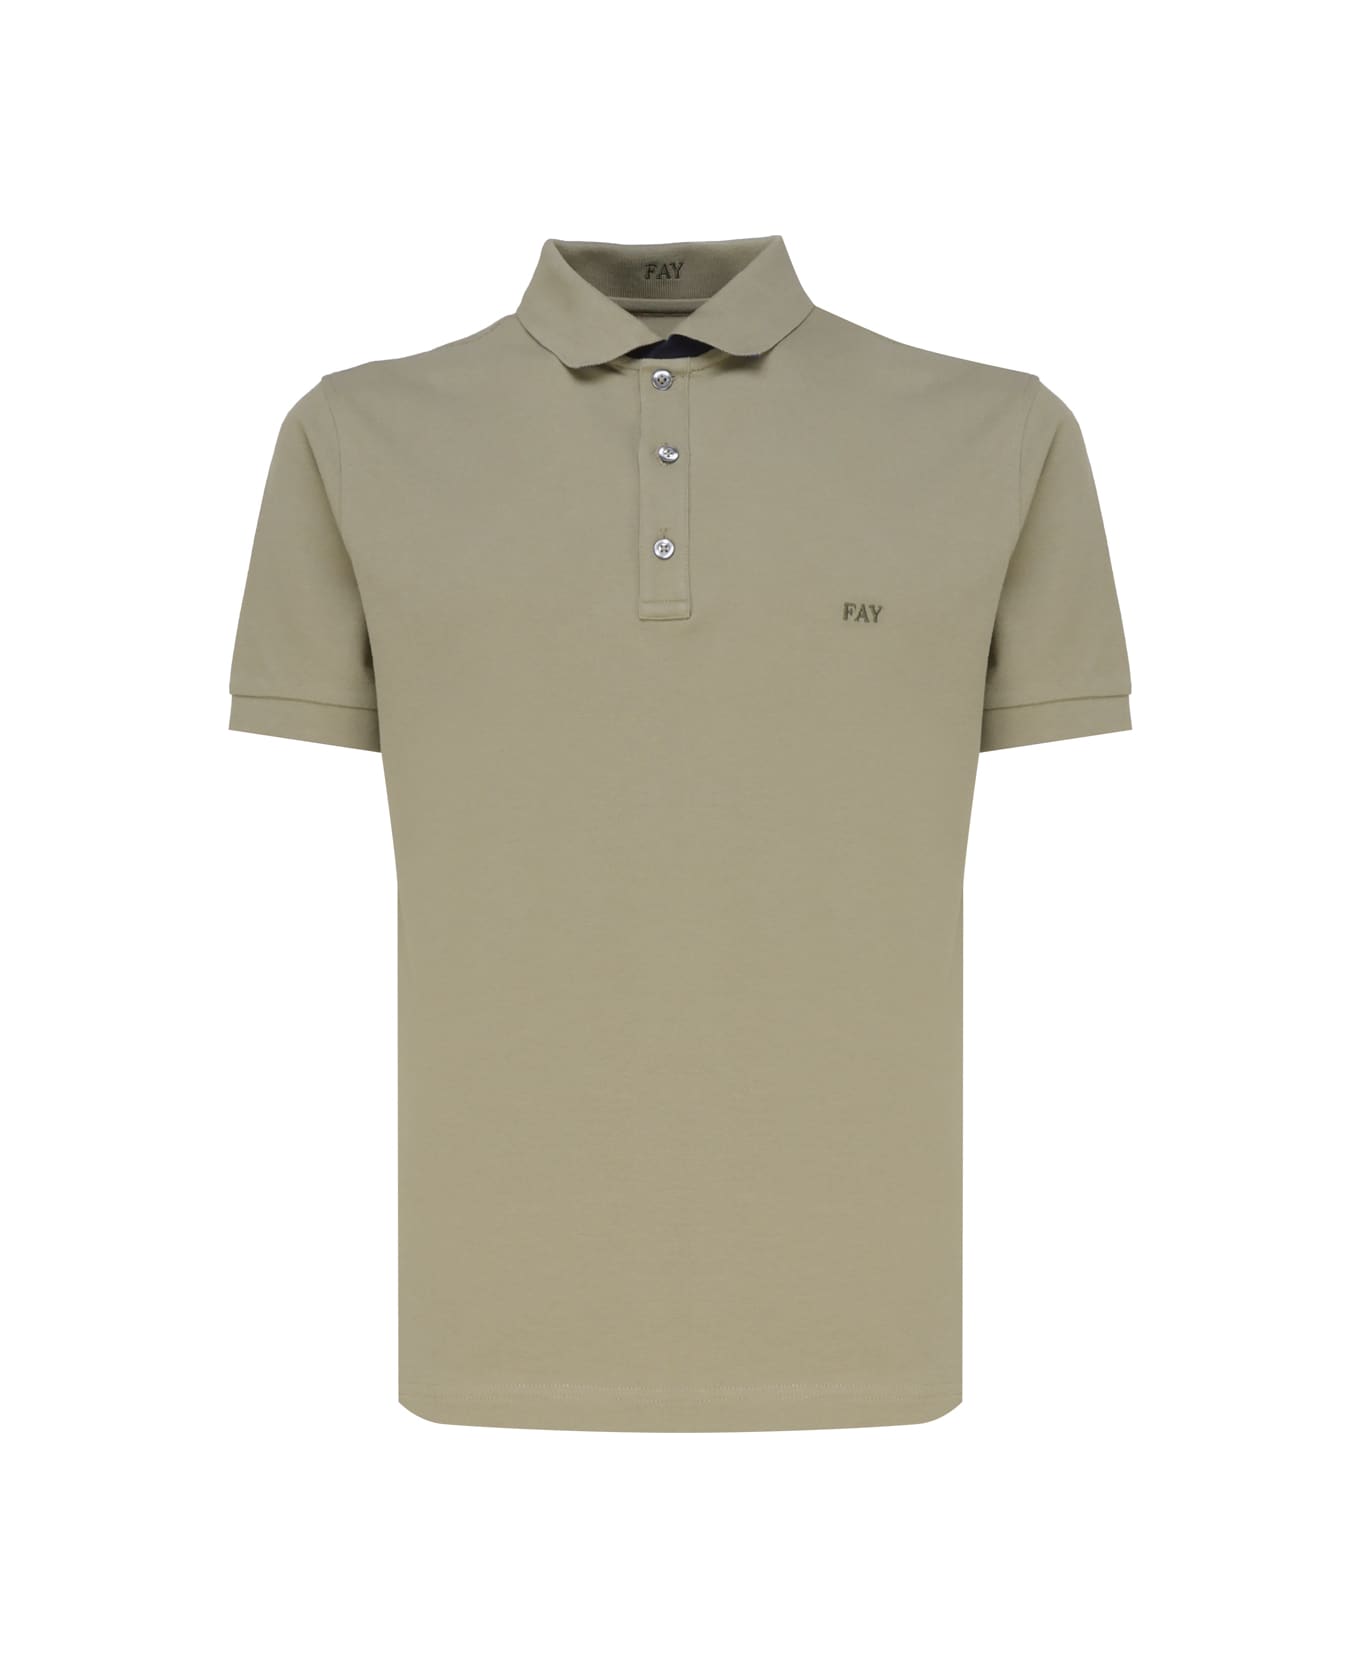 Fay Polo T-shirt In Cotton - Grey